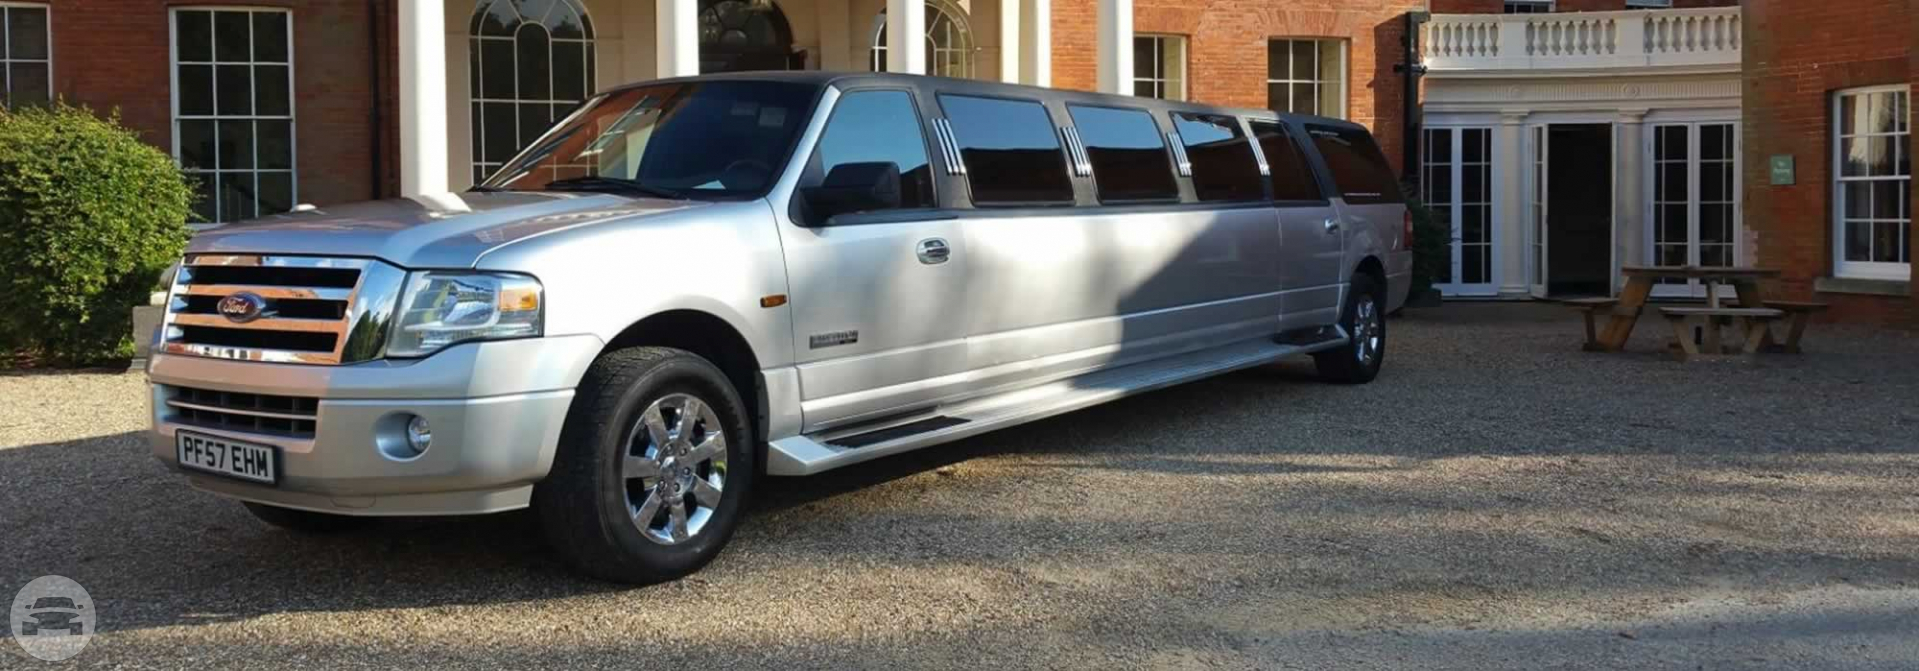 FORD EXPEDITION SUV LIMO
Limo /
Loughton, UK

 / Hourly £0.00
